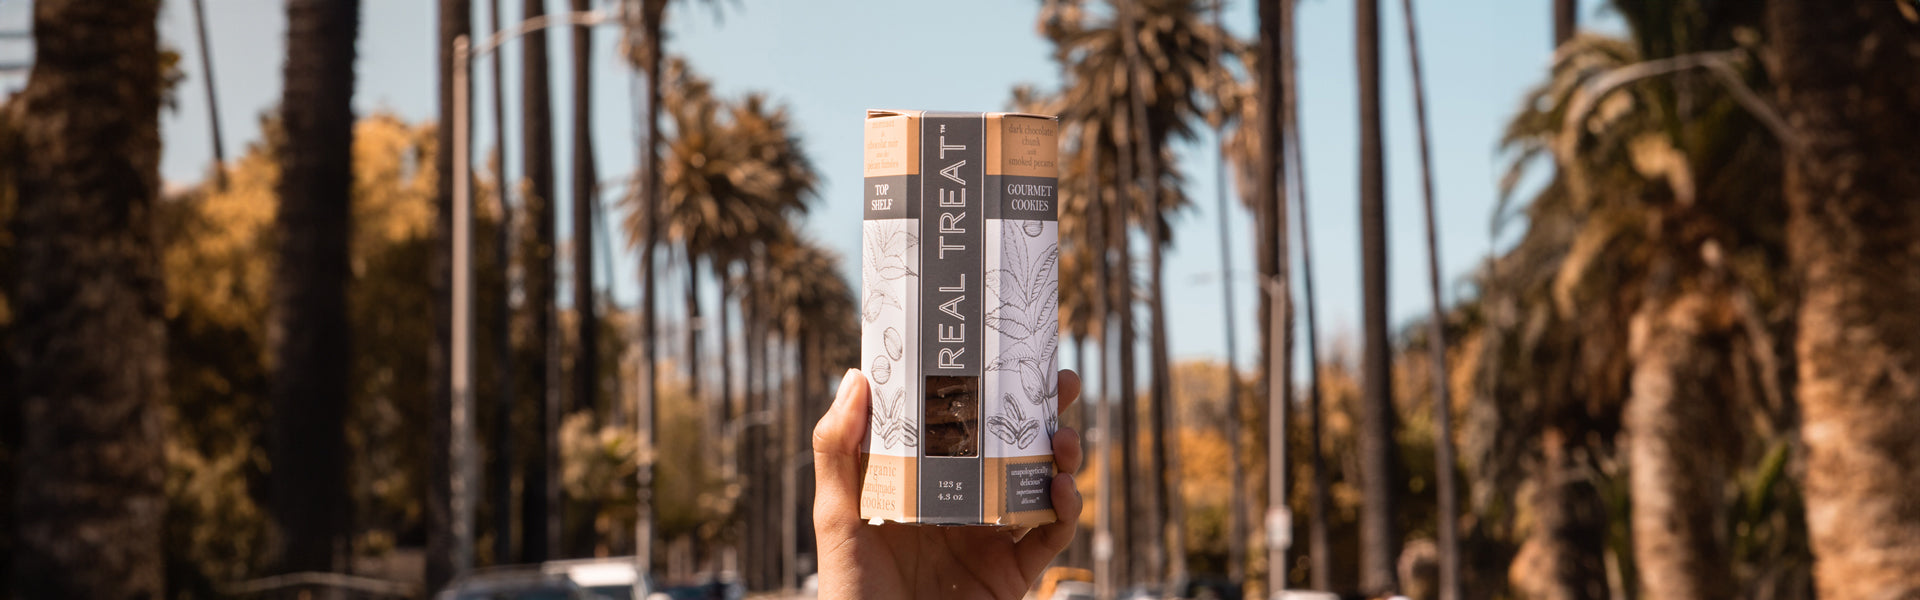 A package of Real Treat Dark Chocolate chunk with Smoked Pecans cookies is held up in the middle of Sunset Boulevard in Las Angeles.